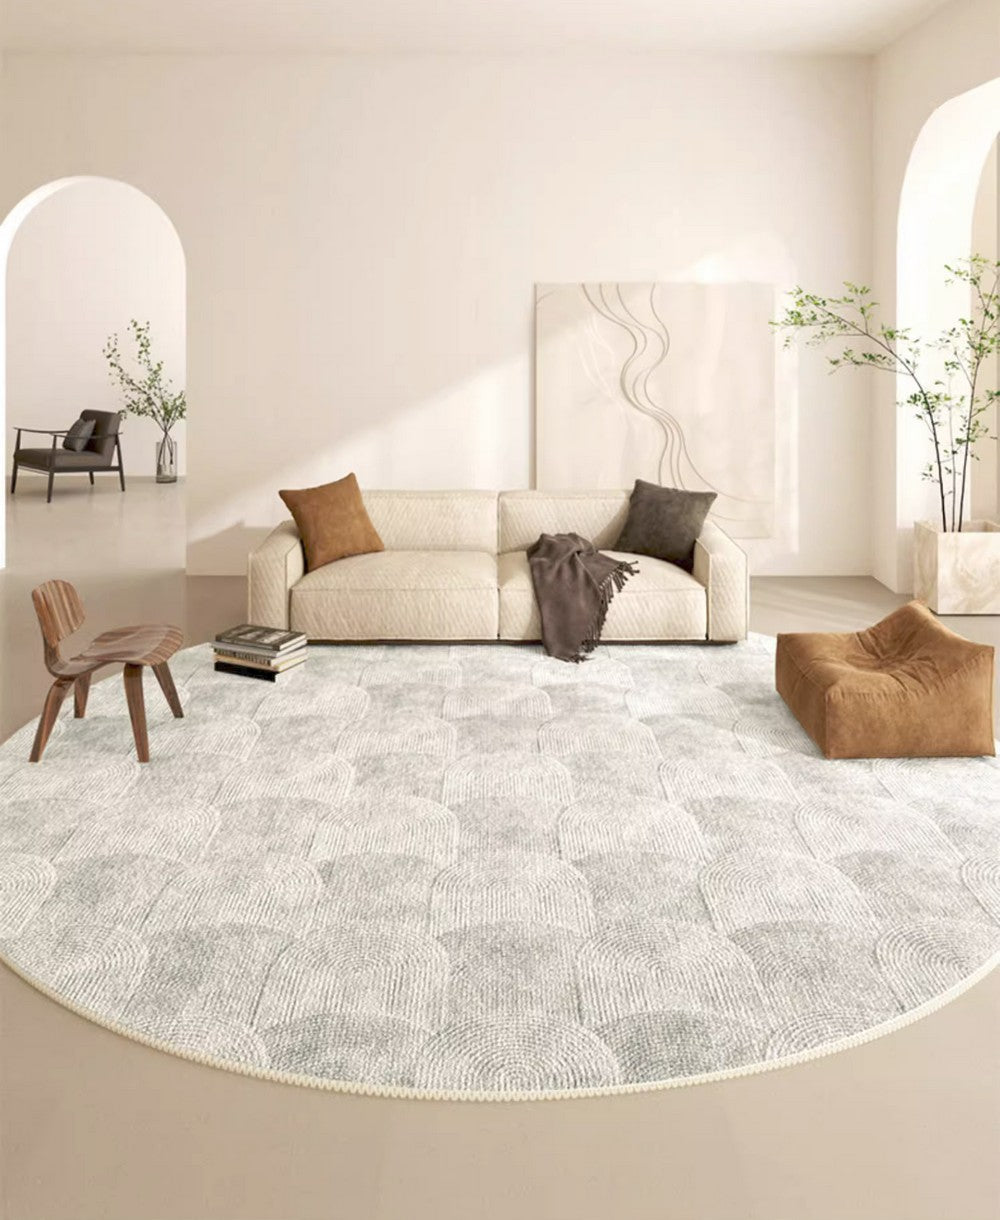 Contemporary Area Rugs for Bedroom, Round Area Rug for Dining Room, Coffee Table Rugs, Circular Modern Area Rug, Large Rugs for Living Room